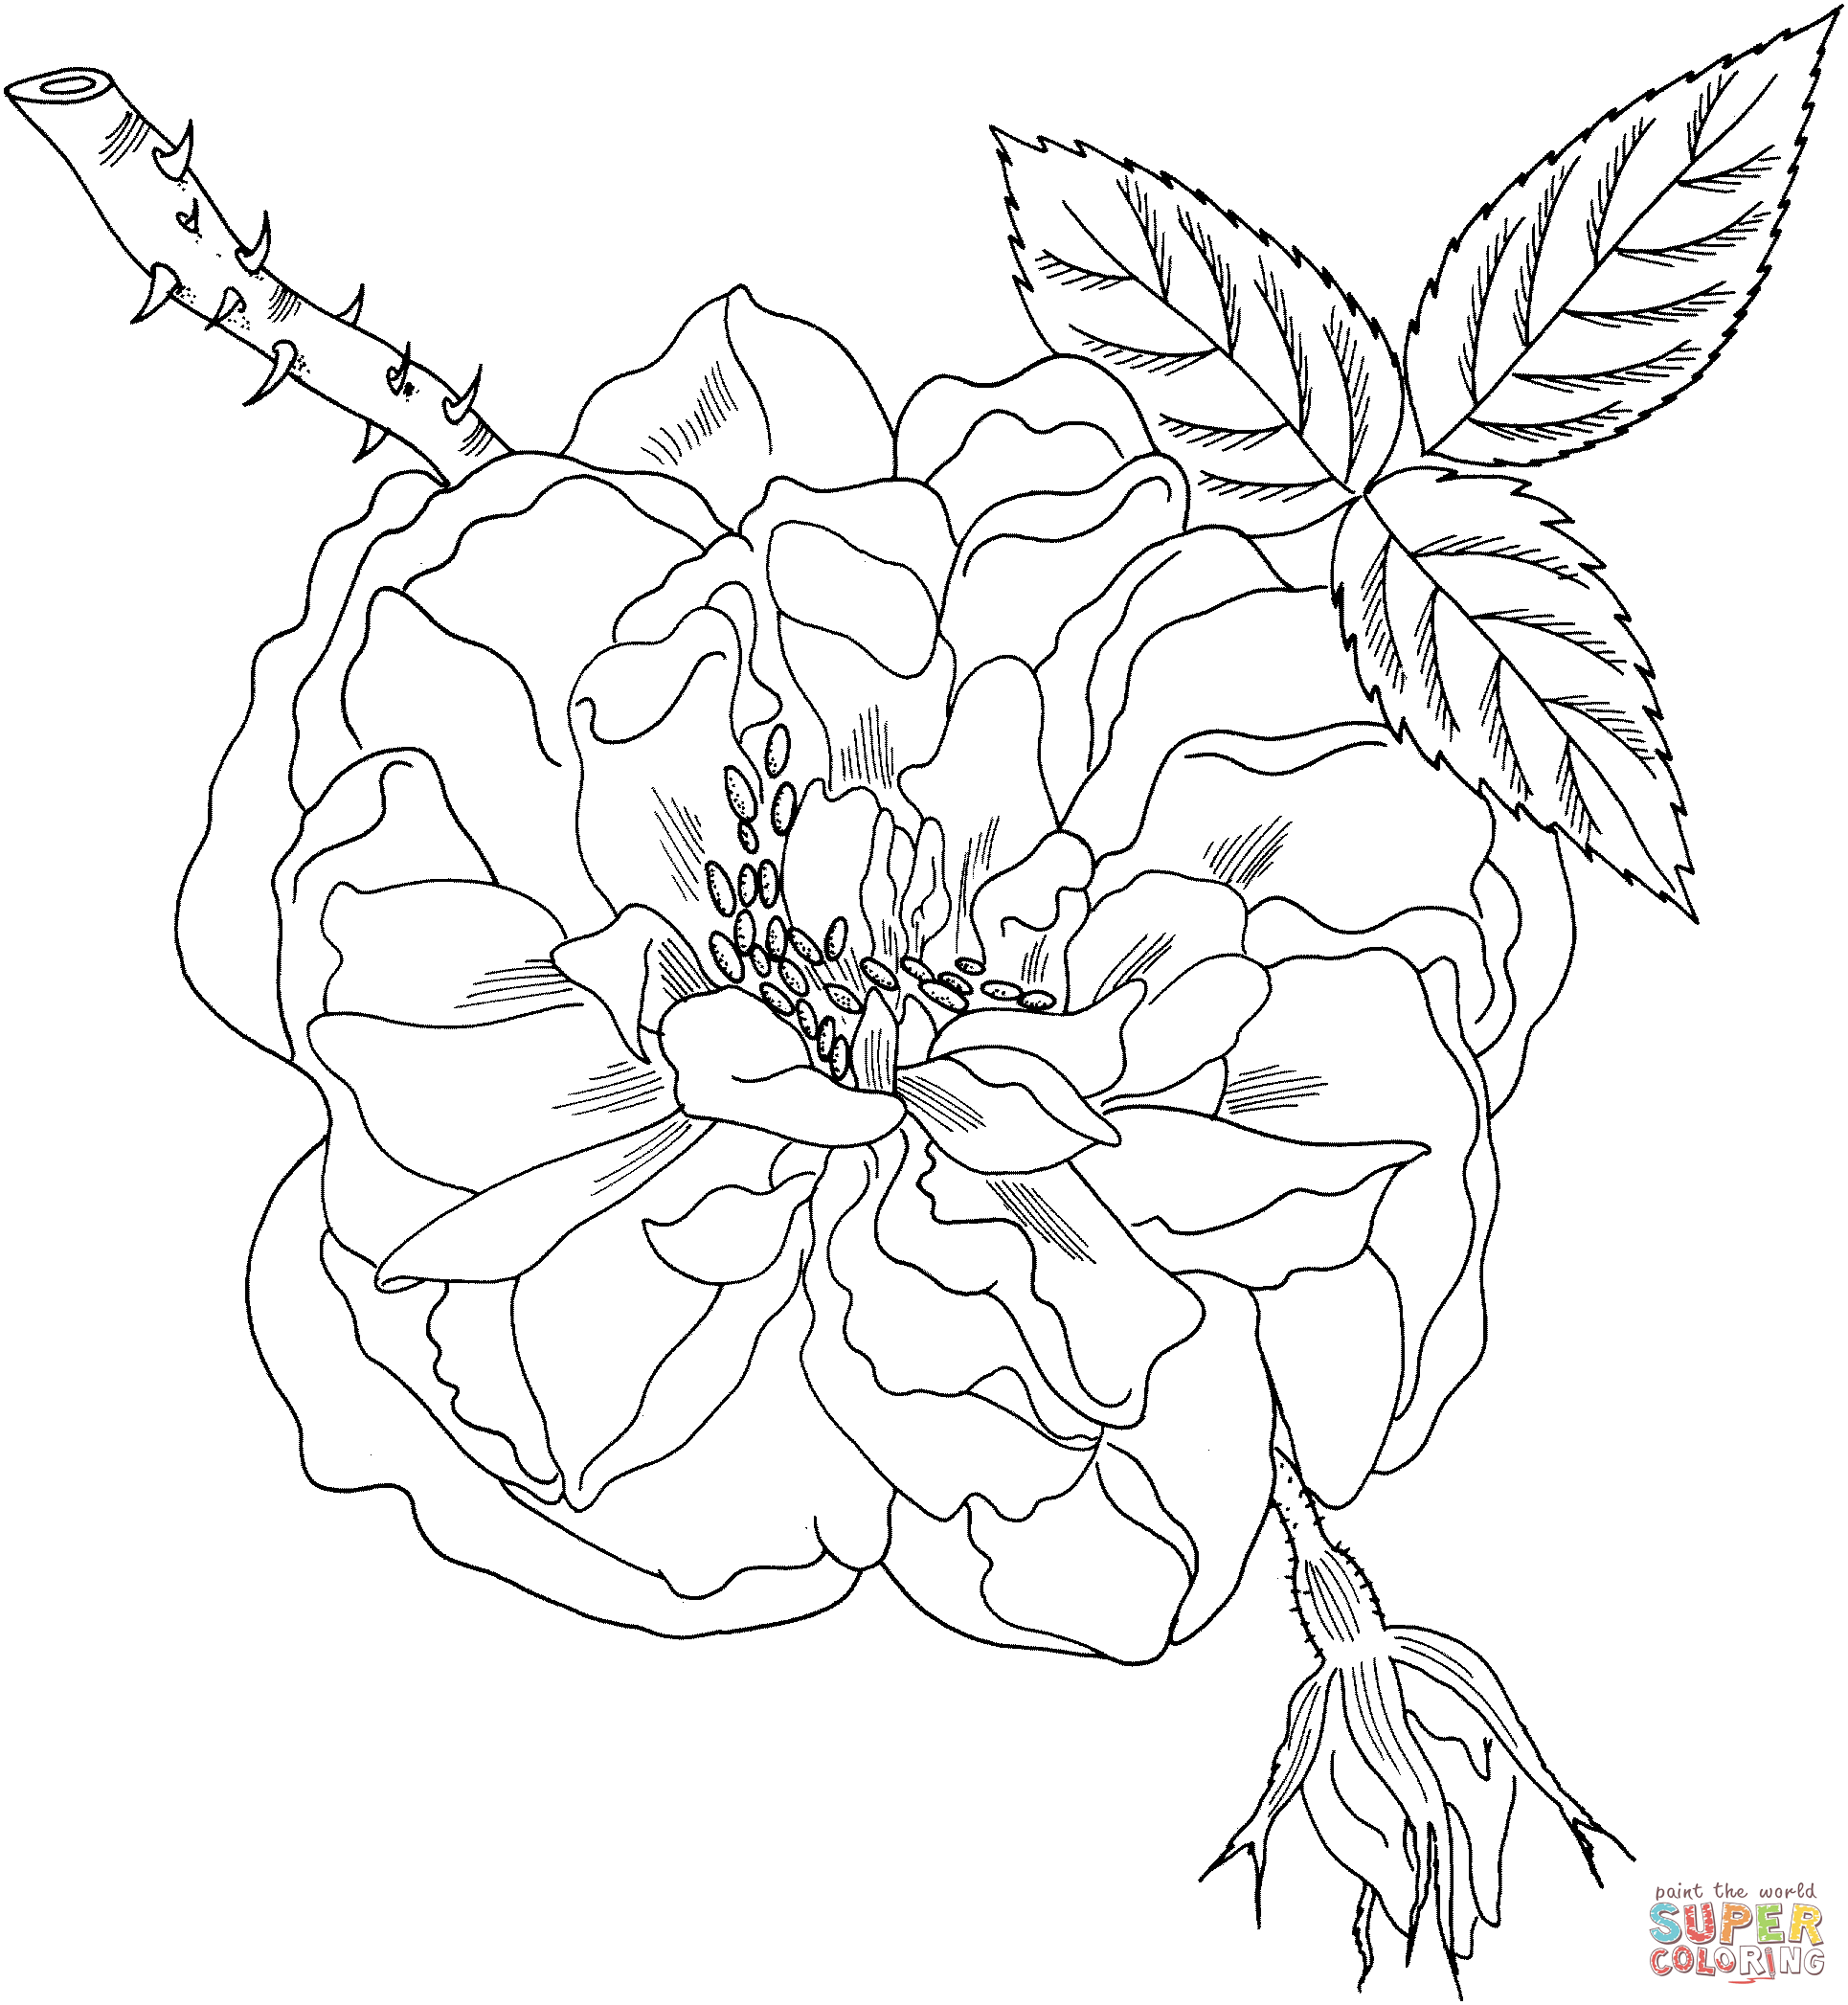 Lancasters and yorks rose coloring page free printable coloring pages